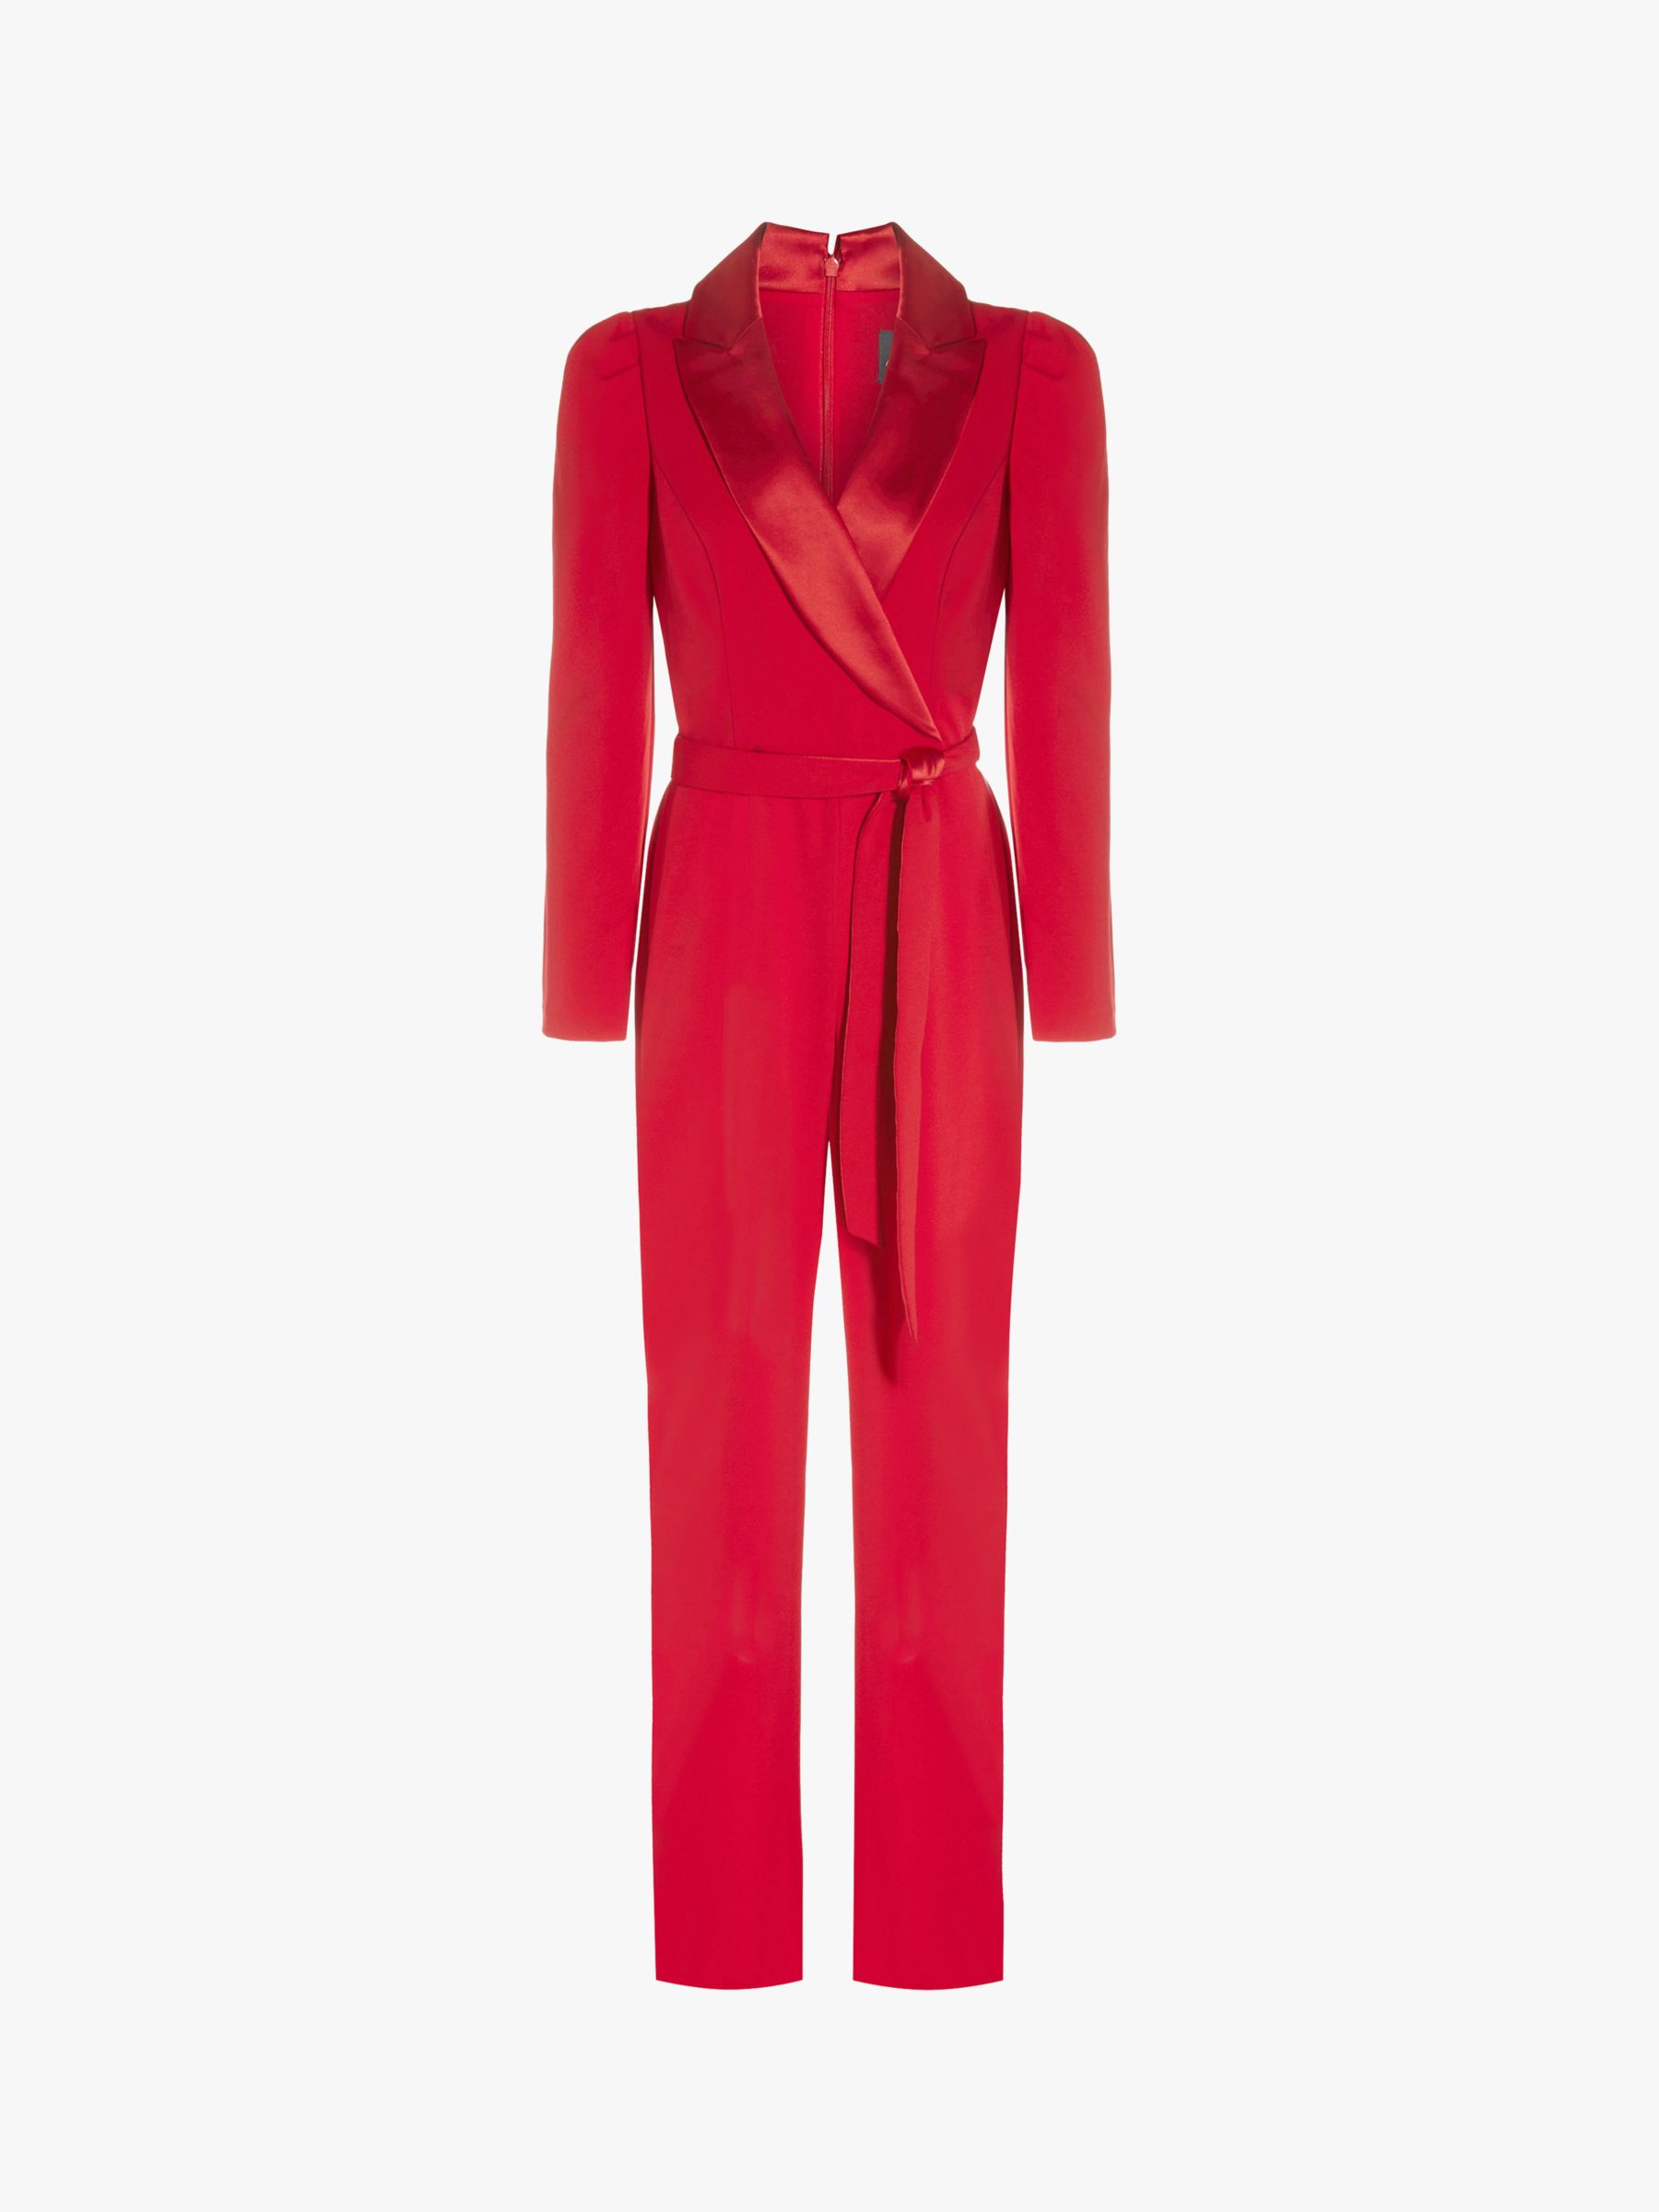 Adrianna Papell Knit Crepe Tuxedo Jumpsuit, Red at John Lewis & Partners